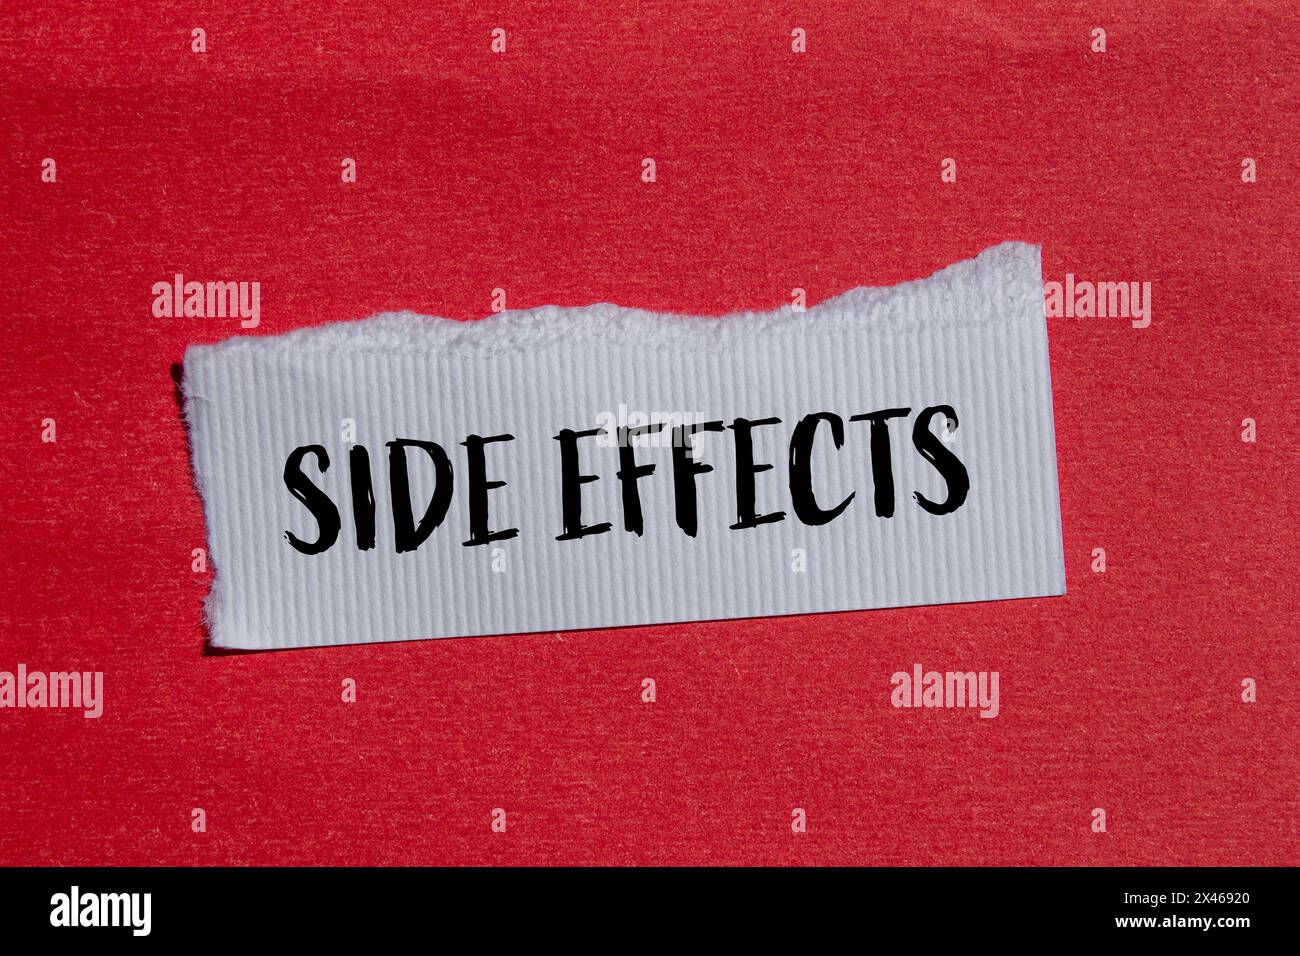 Side effects words written on ripped white paper with red background. Conceptual side effects symbol. Copy space. Stock Photo